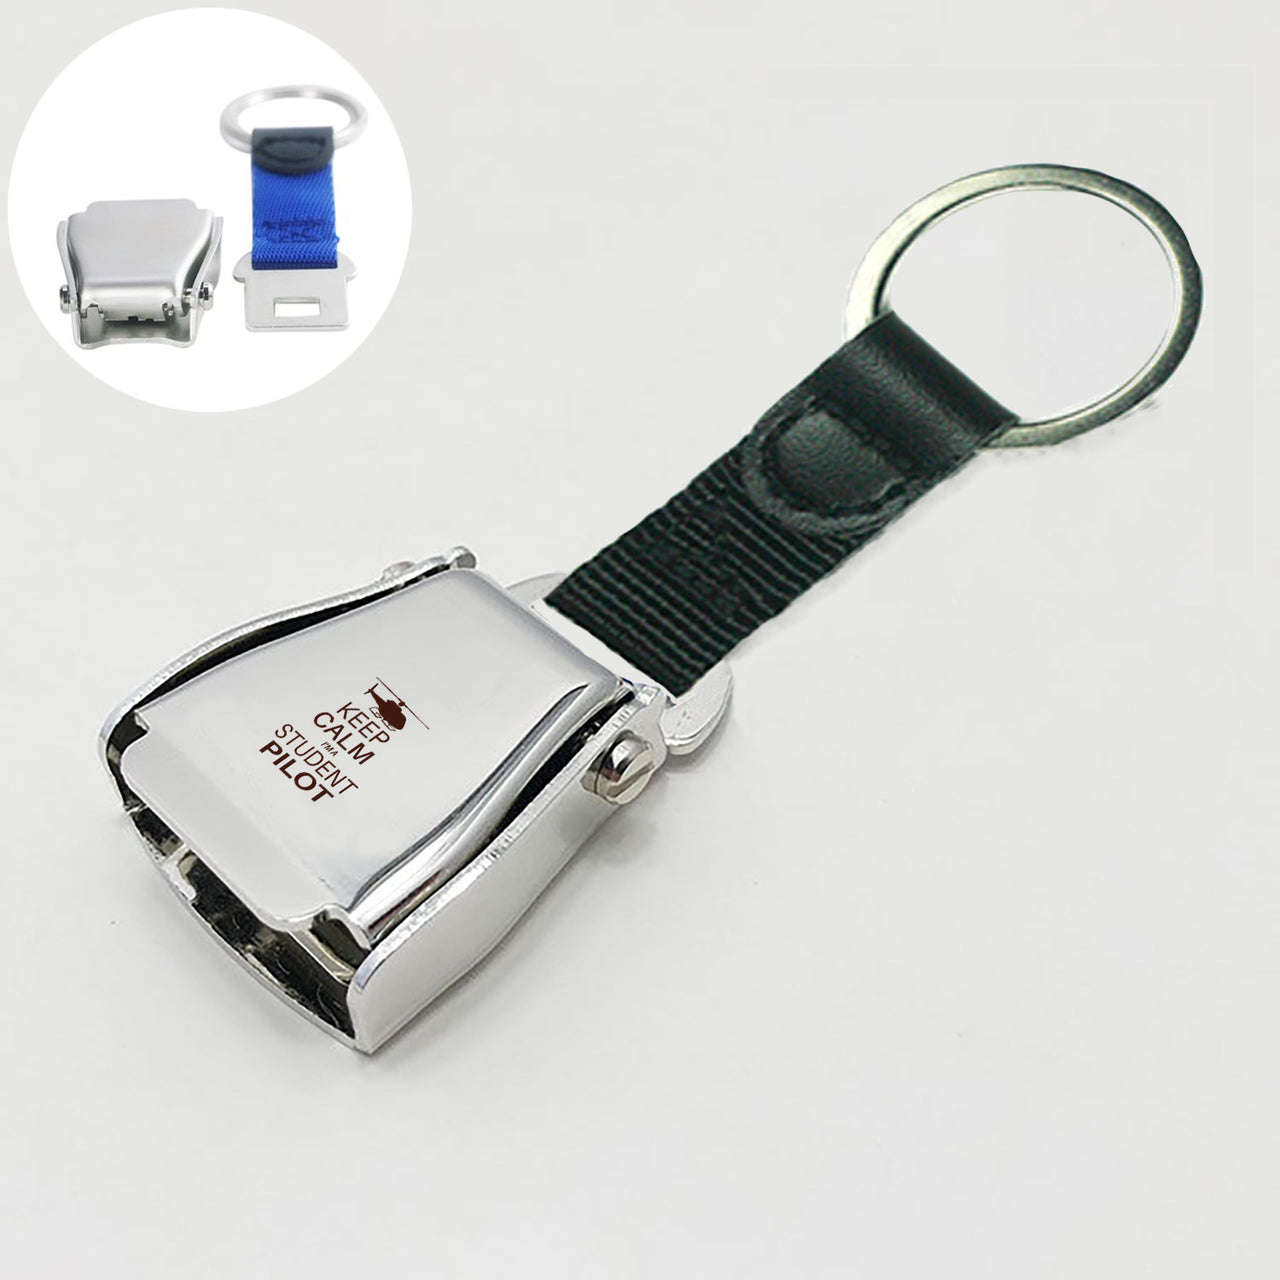 Student Pilot (Helicopter) Designed Airplane Seat Belt Key Chains